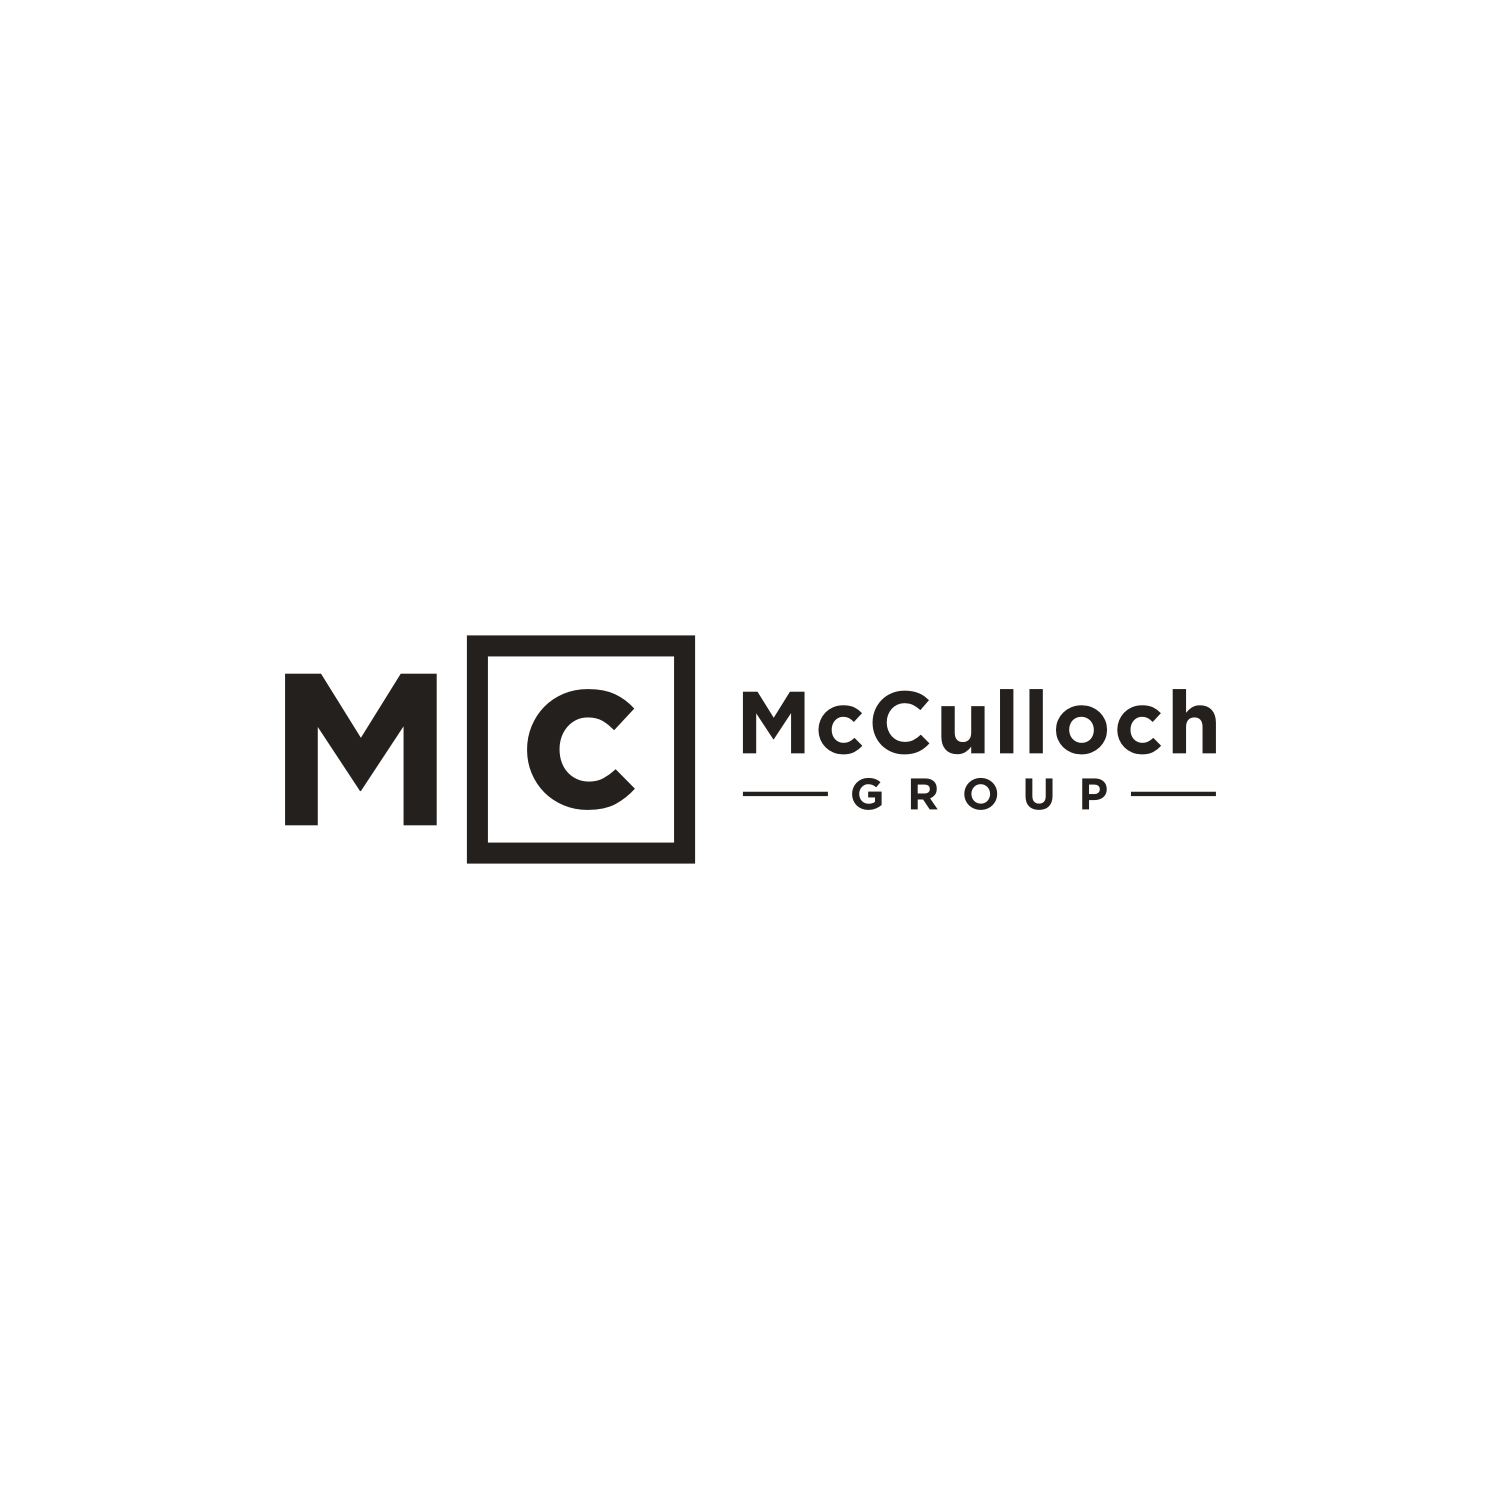 McCulloch Logo - Modern, Professional Logo Design for McCulloch Group by Zzamiq ...